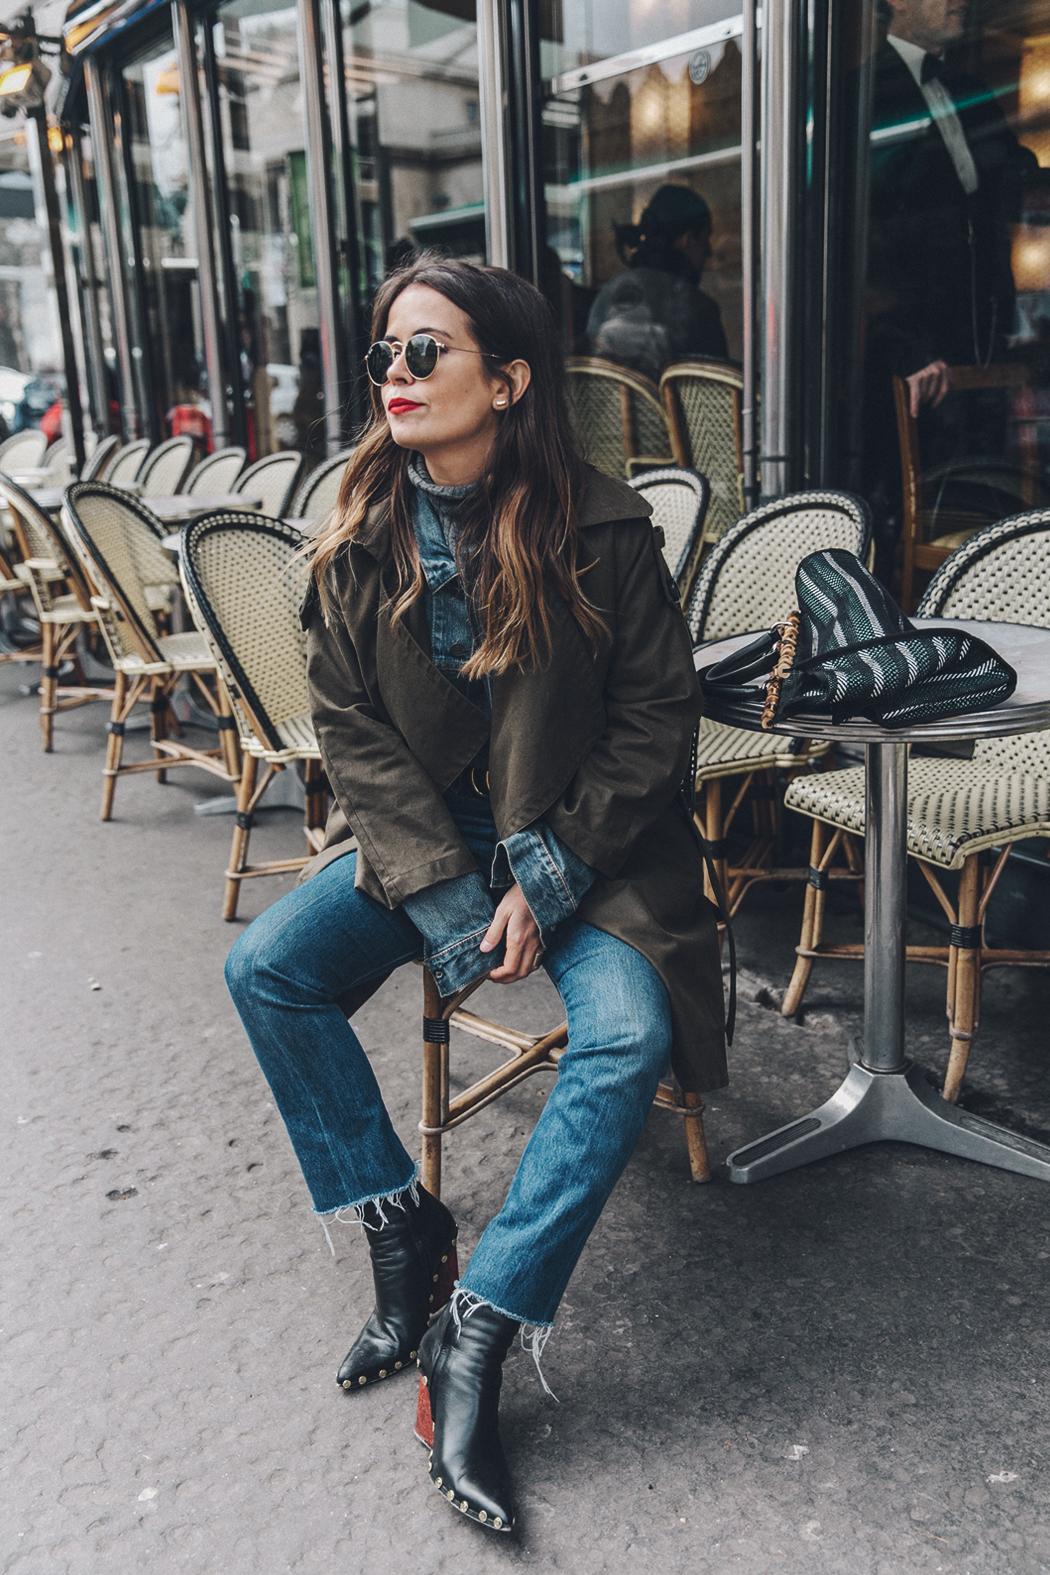 Layers-Denim_Levis-Parka-Striiped_Basket-Outfit-Celine_Boots-Street_Style-23